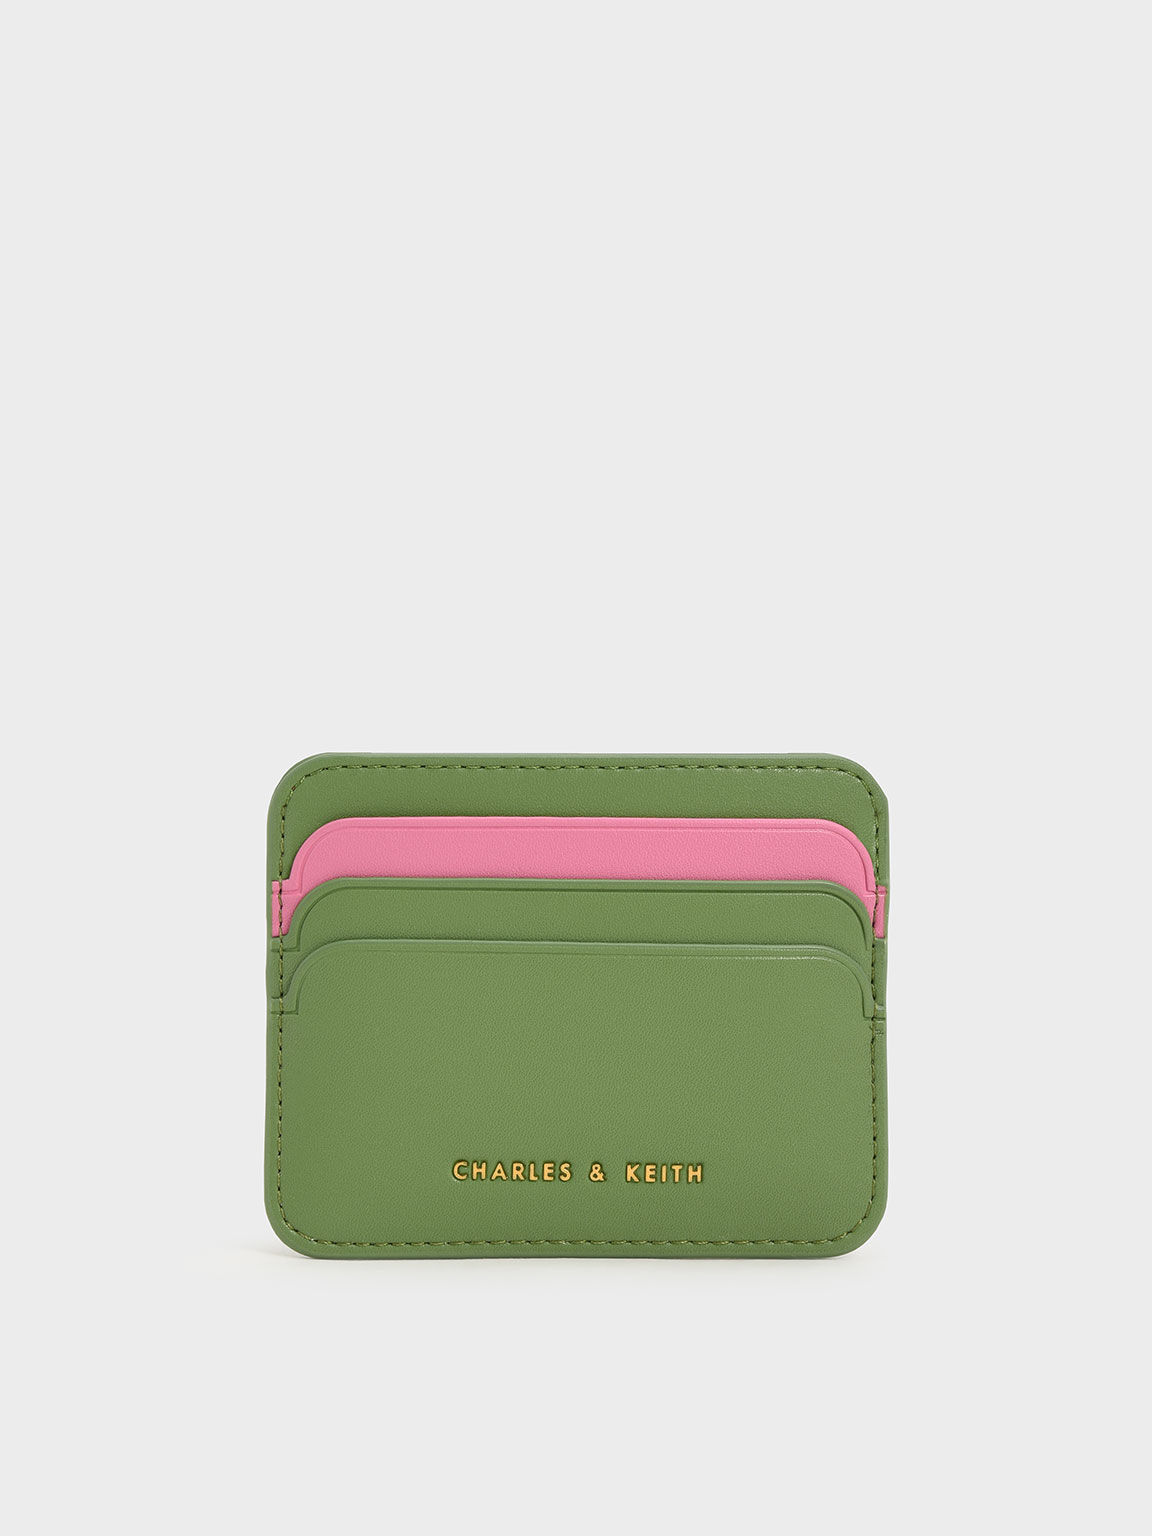 Charles and keith card holder